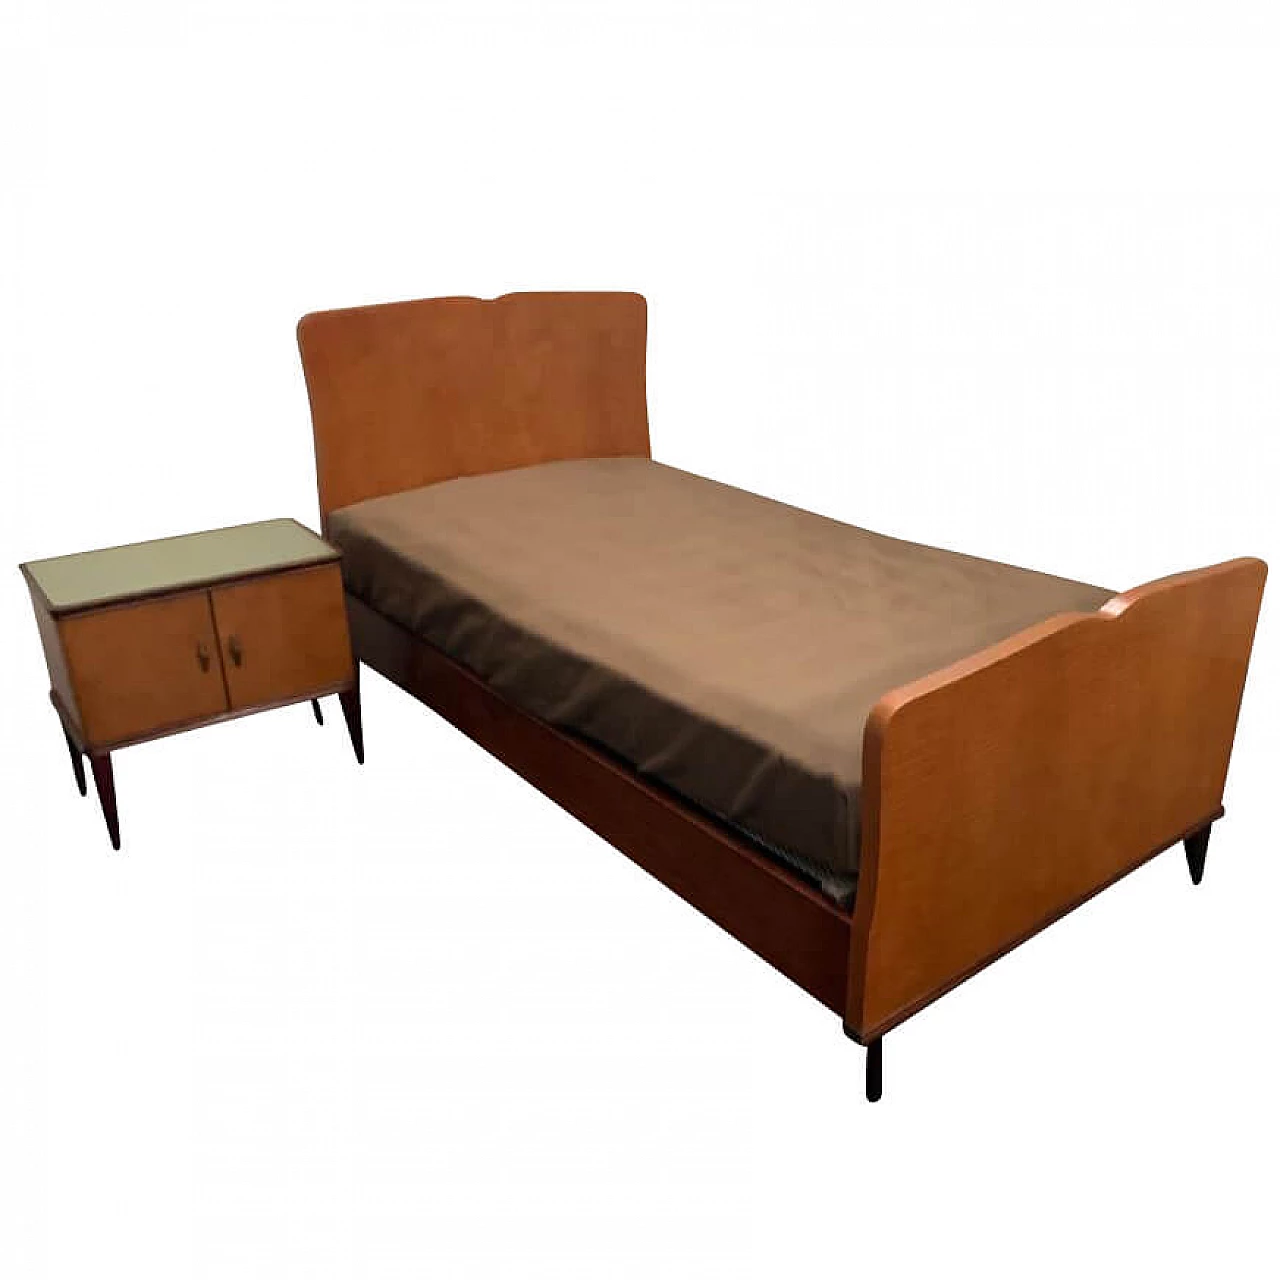 Bed and bedside table set in blond mahogany wood, 1950s 1182870